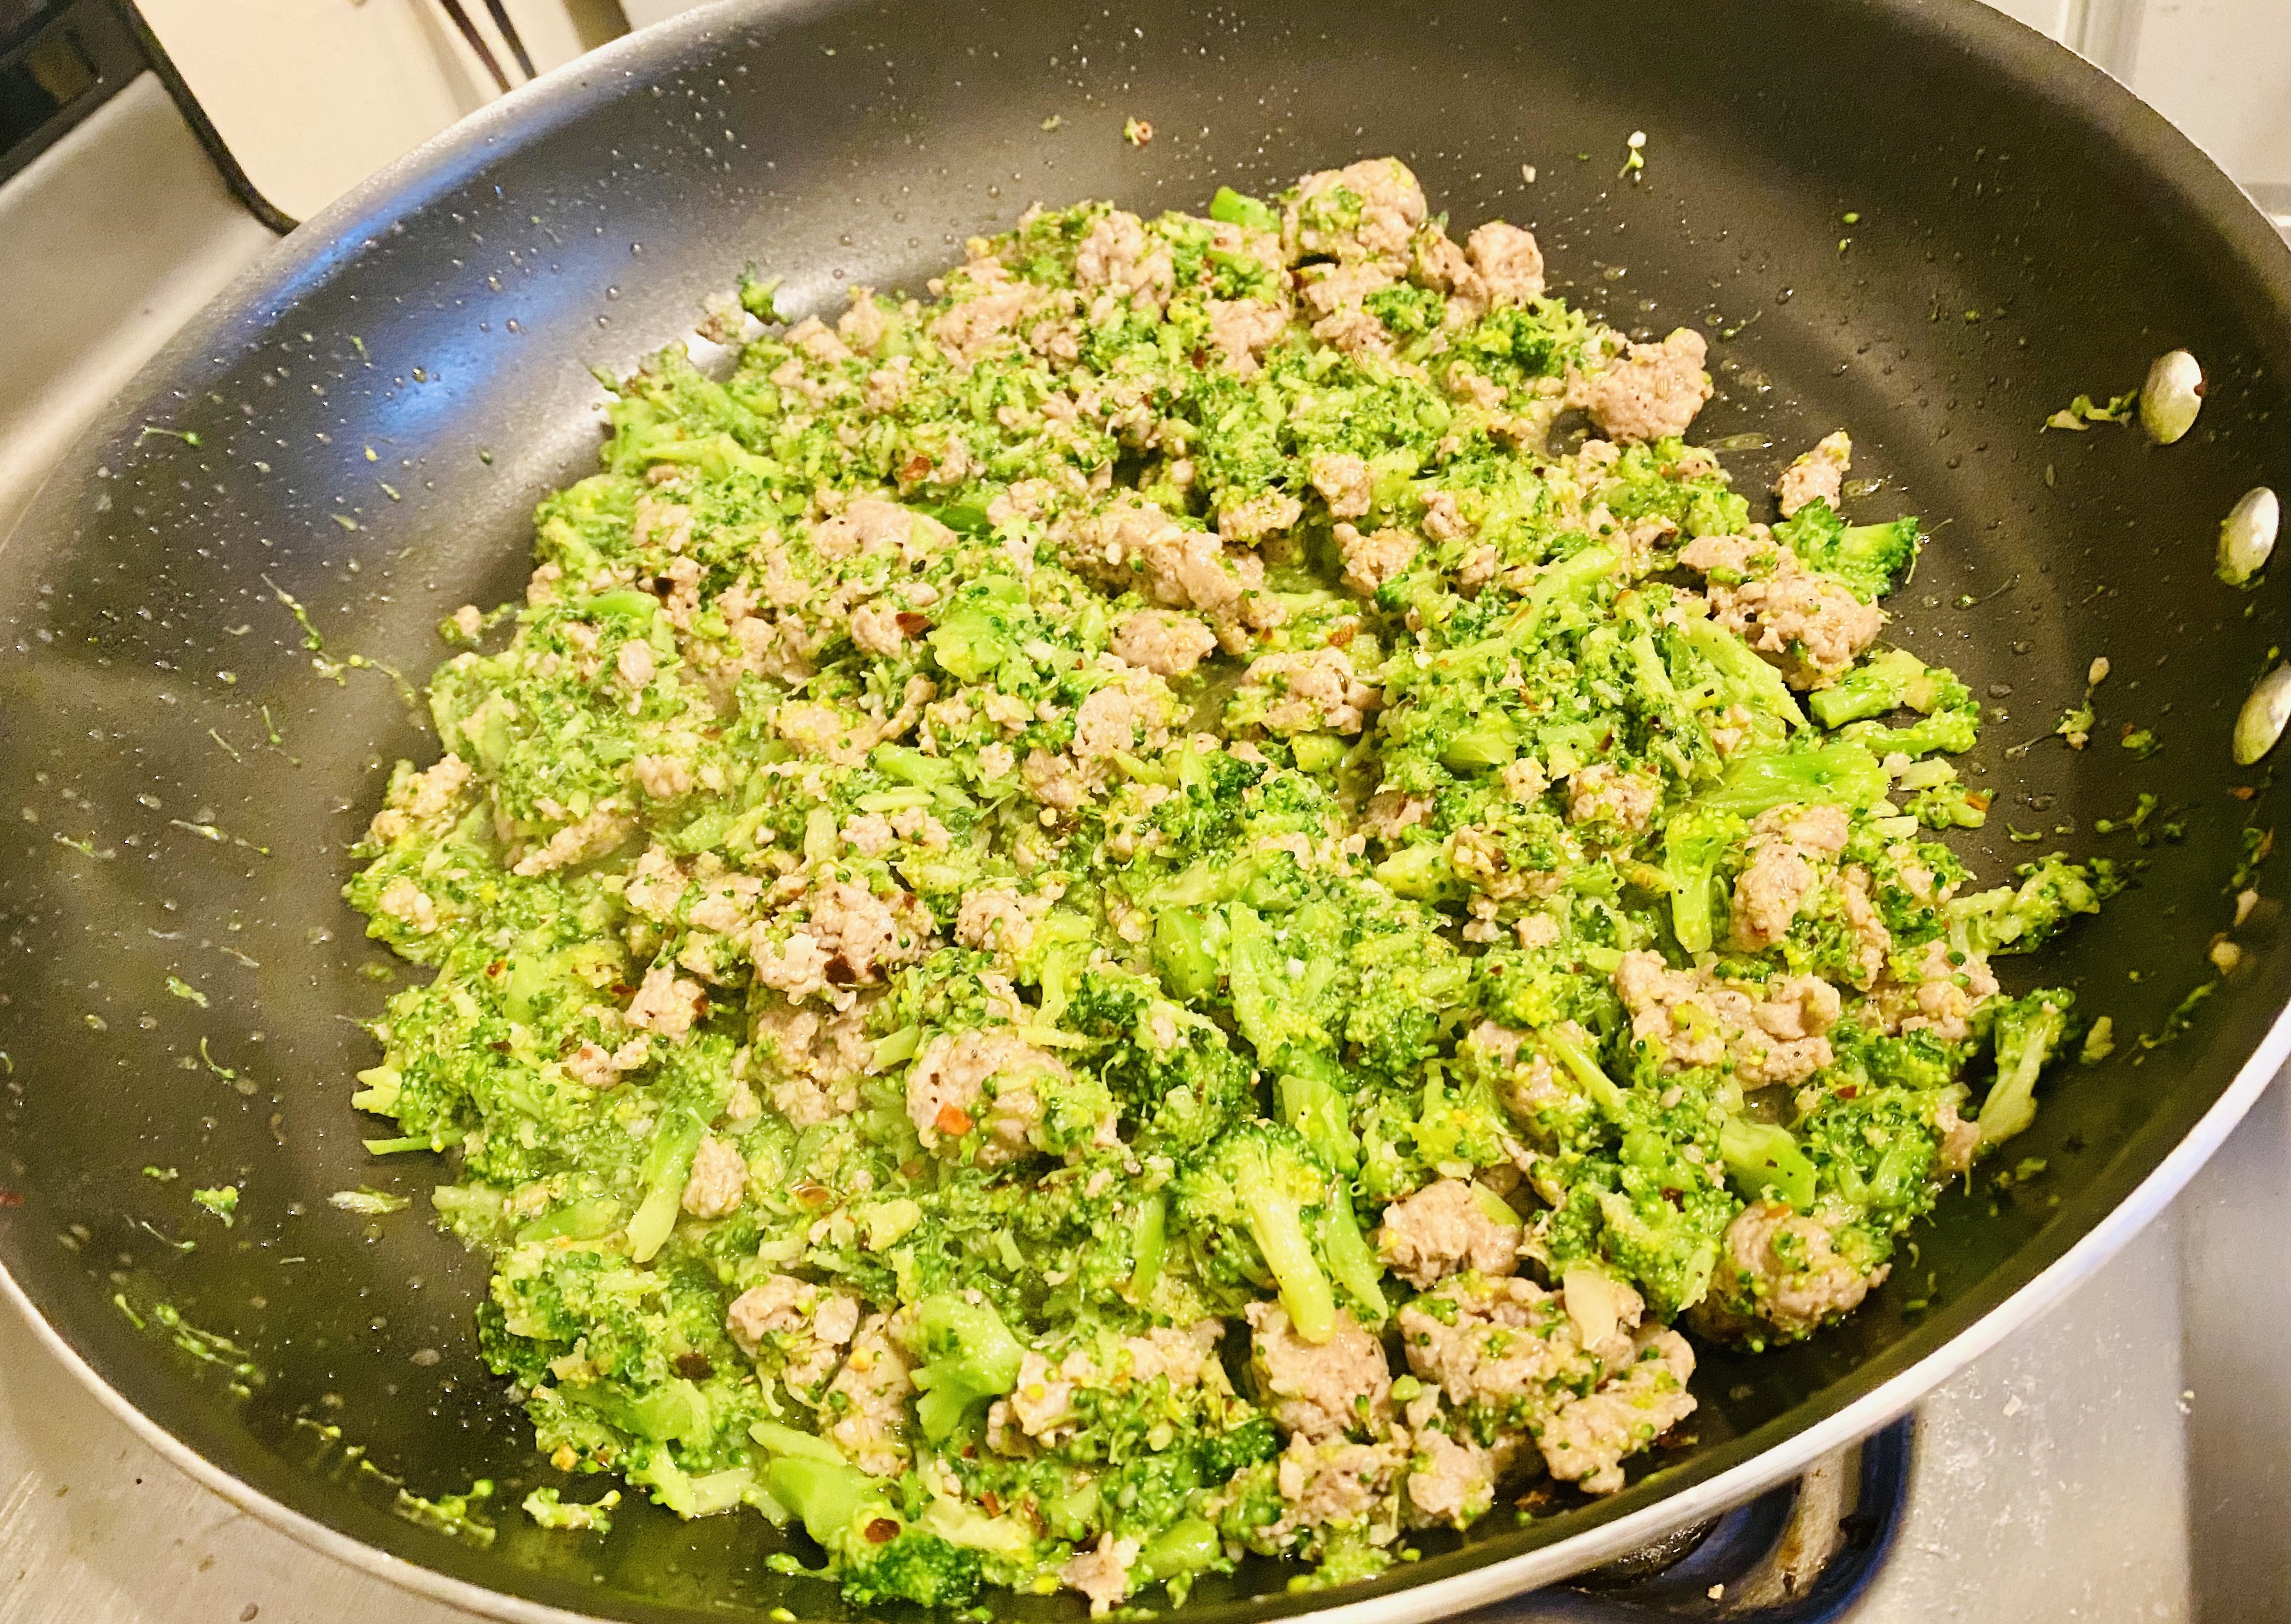 Broccoli and Sausage in pan